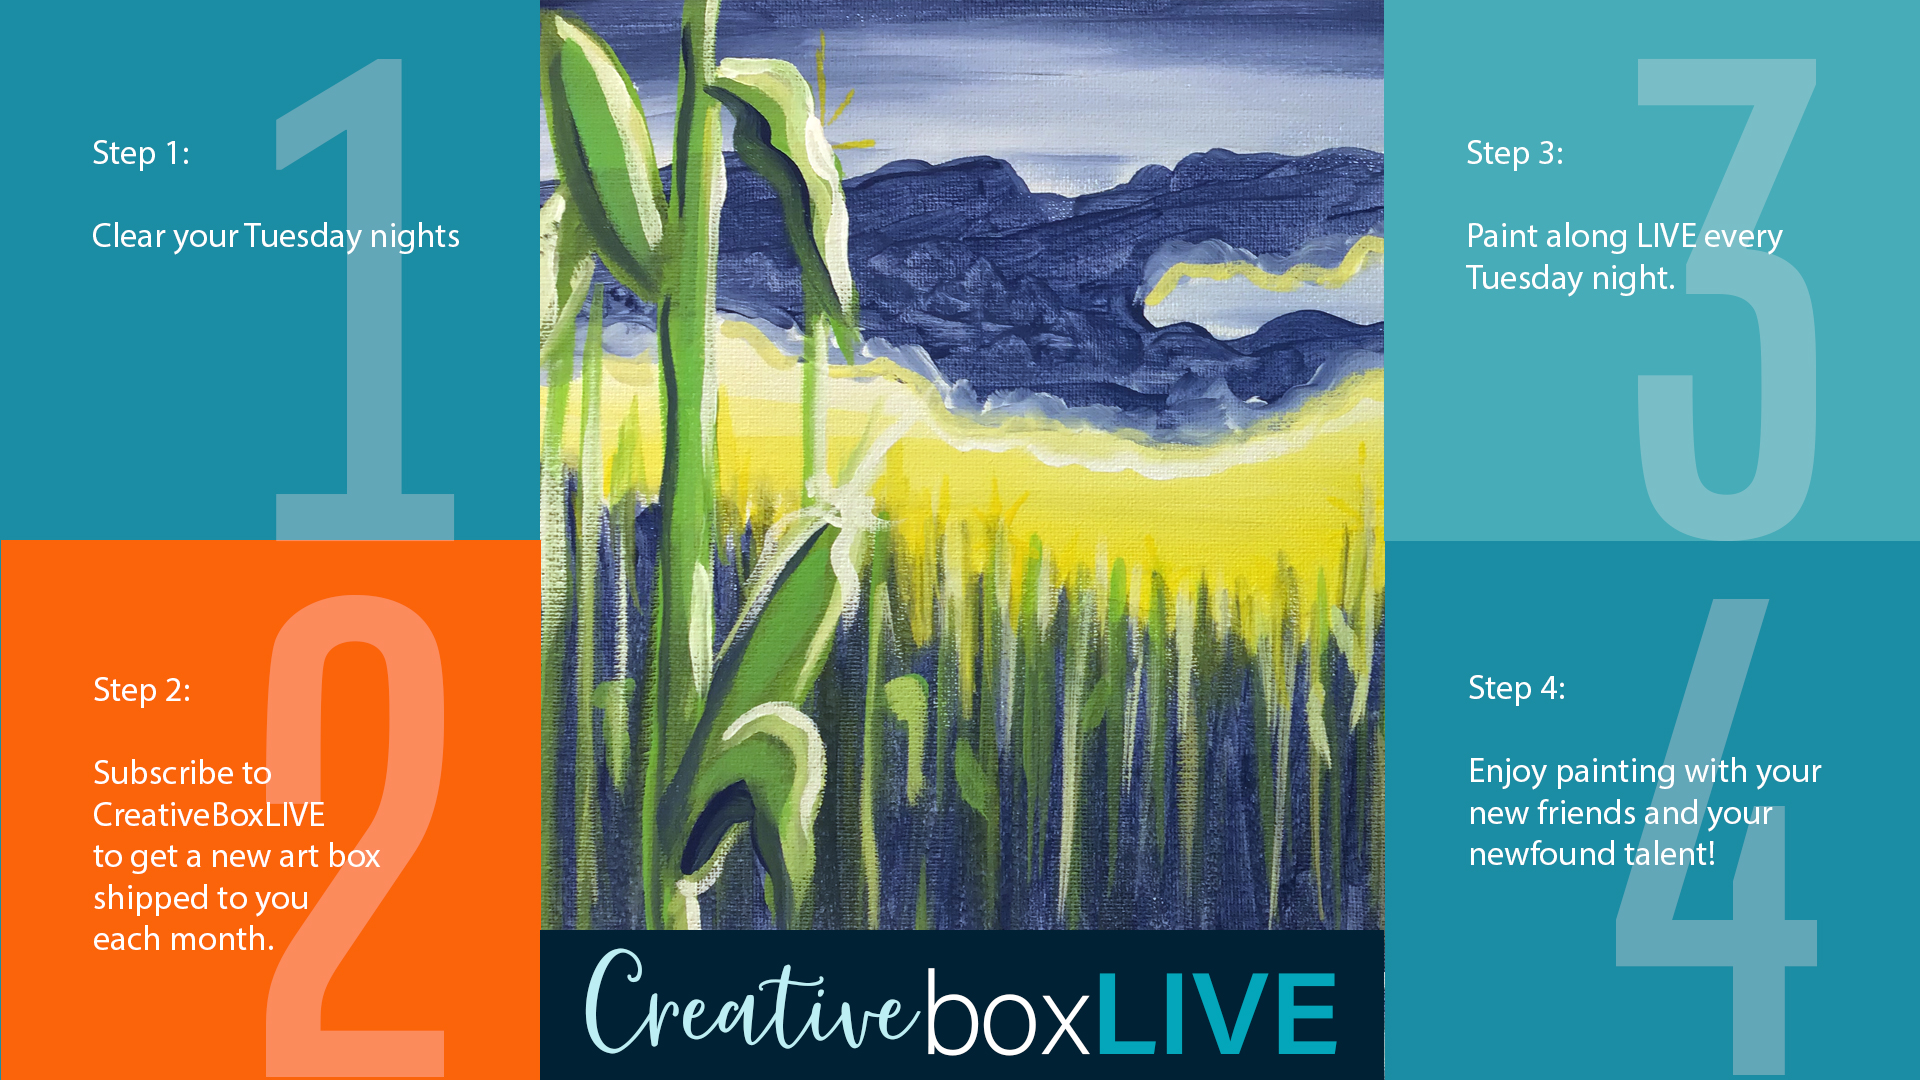 Purple Cornfield CBL a CreativeBoxLIVE painting by Creatively Uncorked